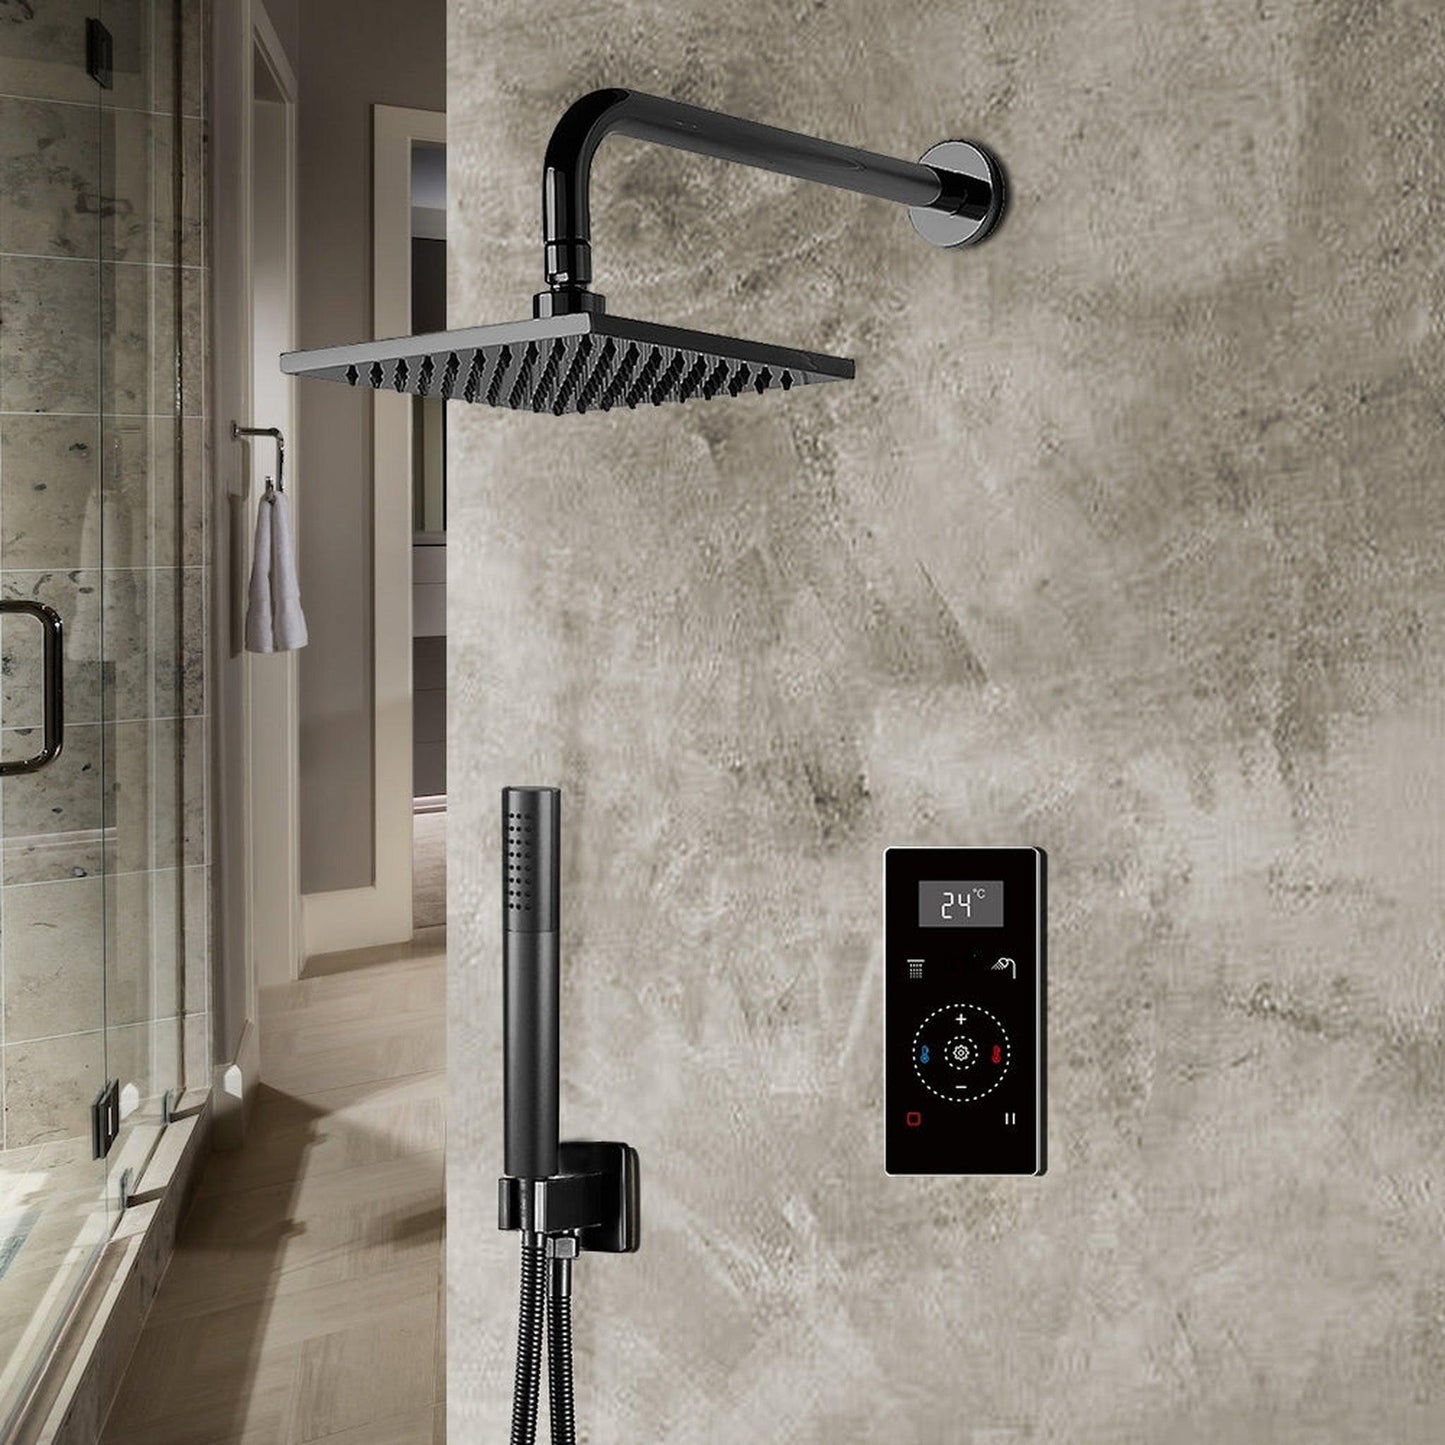 Fontana 12" Matte Black Square Wall-Mounted Automatic Thermostatic Shower With Black Digital Touch Screen Shower Mixer Display 2-Function Rainfall Shower Set With Hand Shower